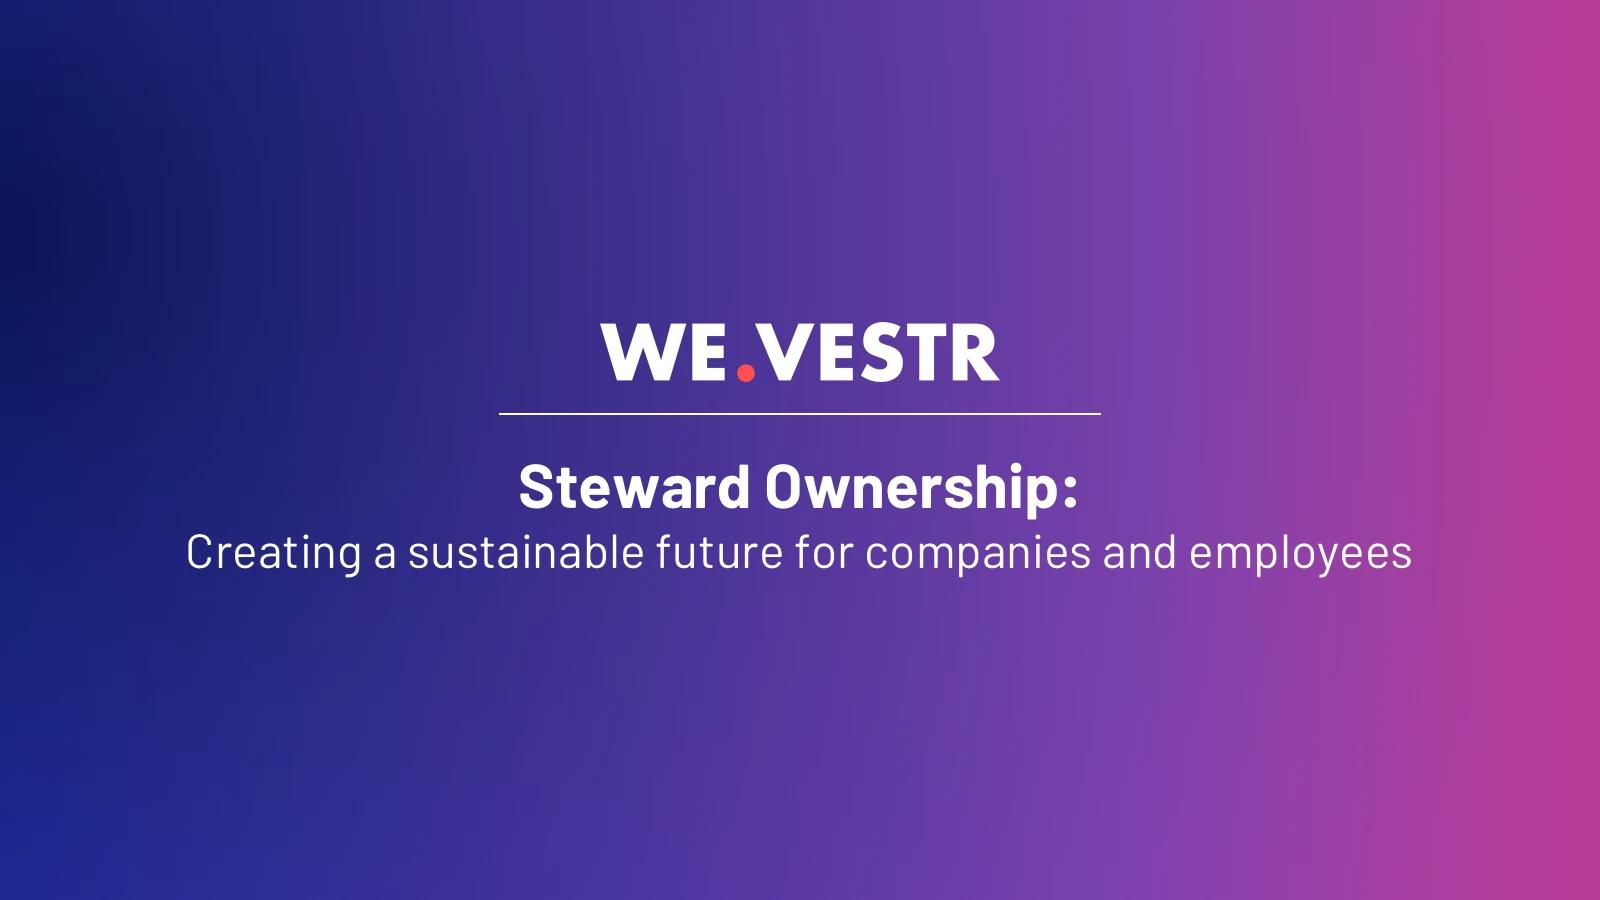 Steward Ownership: Creating a sustainable future for companies and employees